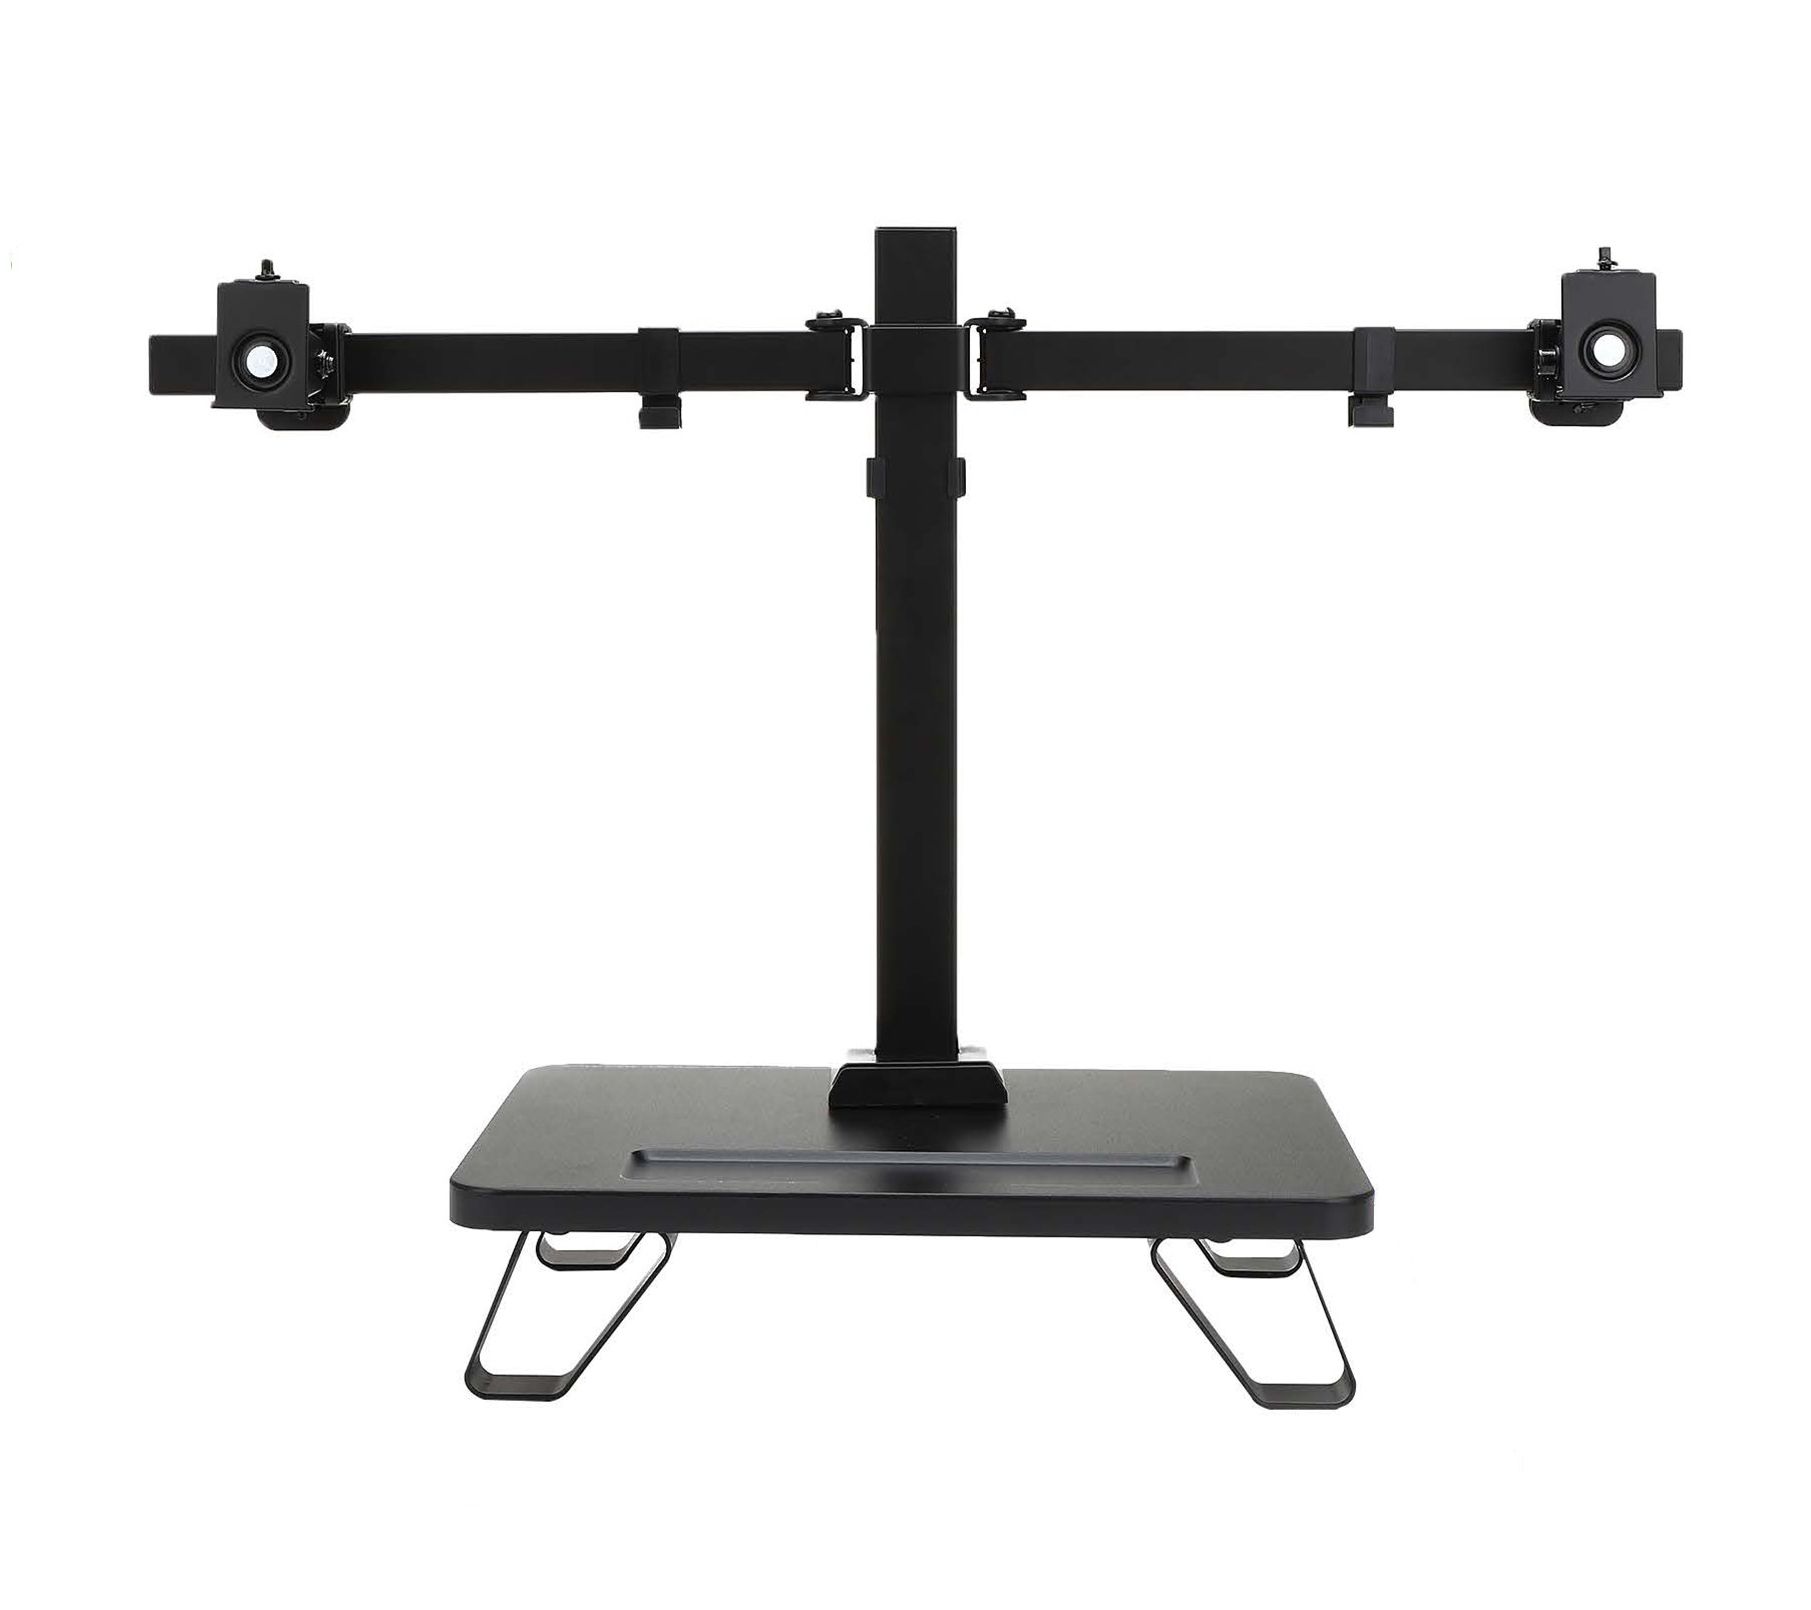  Best Monitor Mount For Standing Desk for Small Bedroom